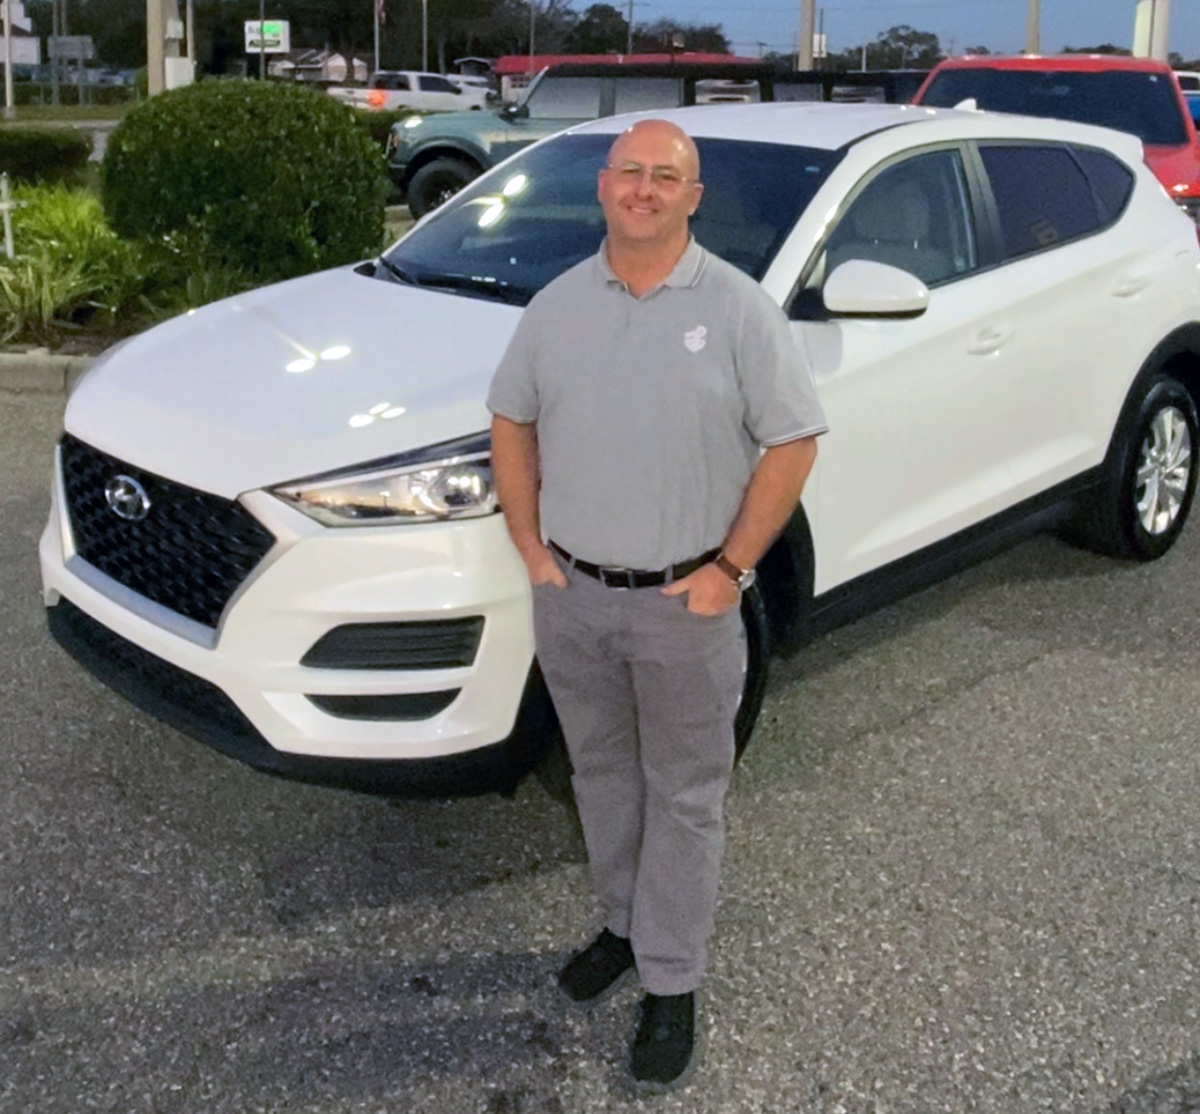 Finding the #Perfect #NewSUV is #Easy! Just come to #LakelandAutomall like David Welch did and pick out your very own like the #HyundaiTucson he found with salesperson with salesperson #TimBrester. #Congratulations David & #ThankYou for choosing us - we're here for you! #Hyundai